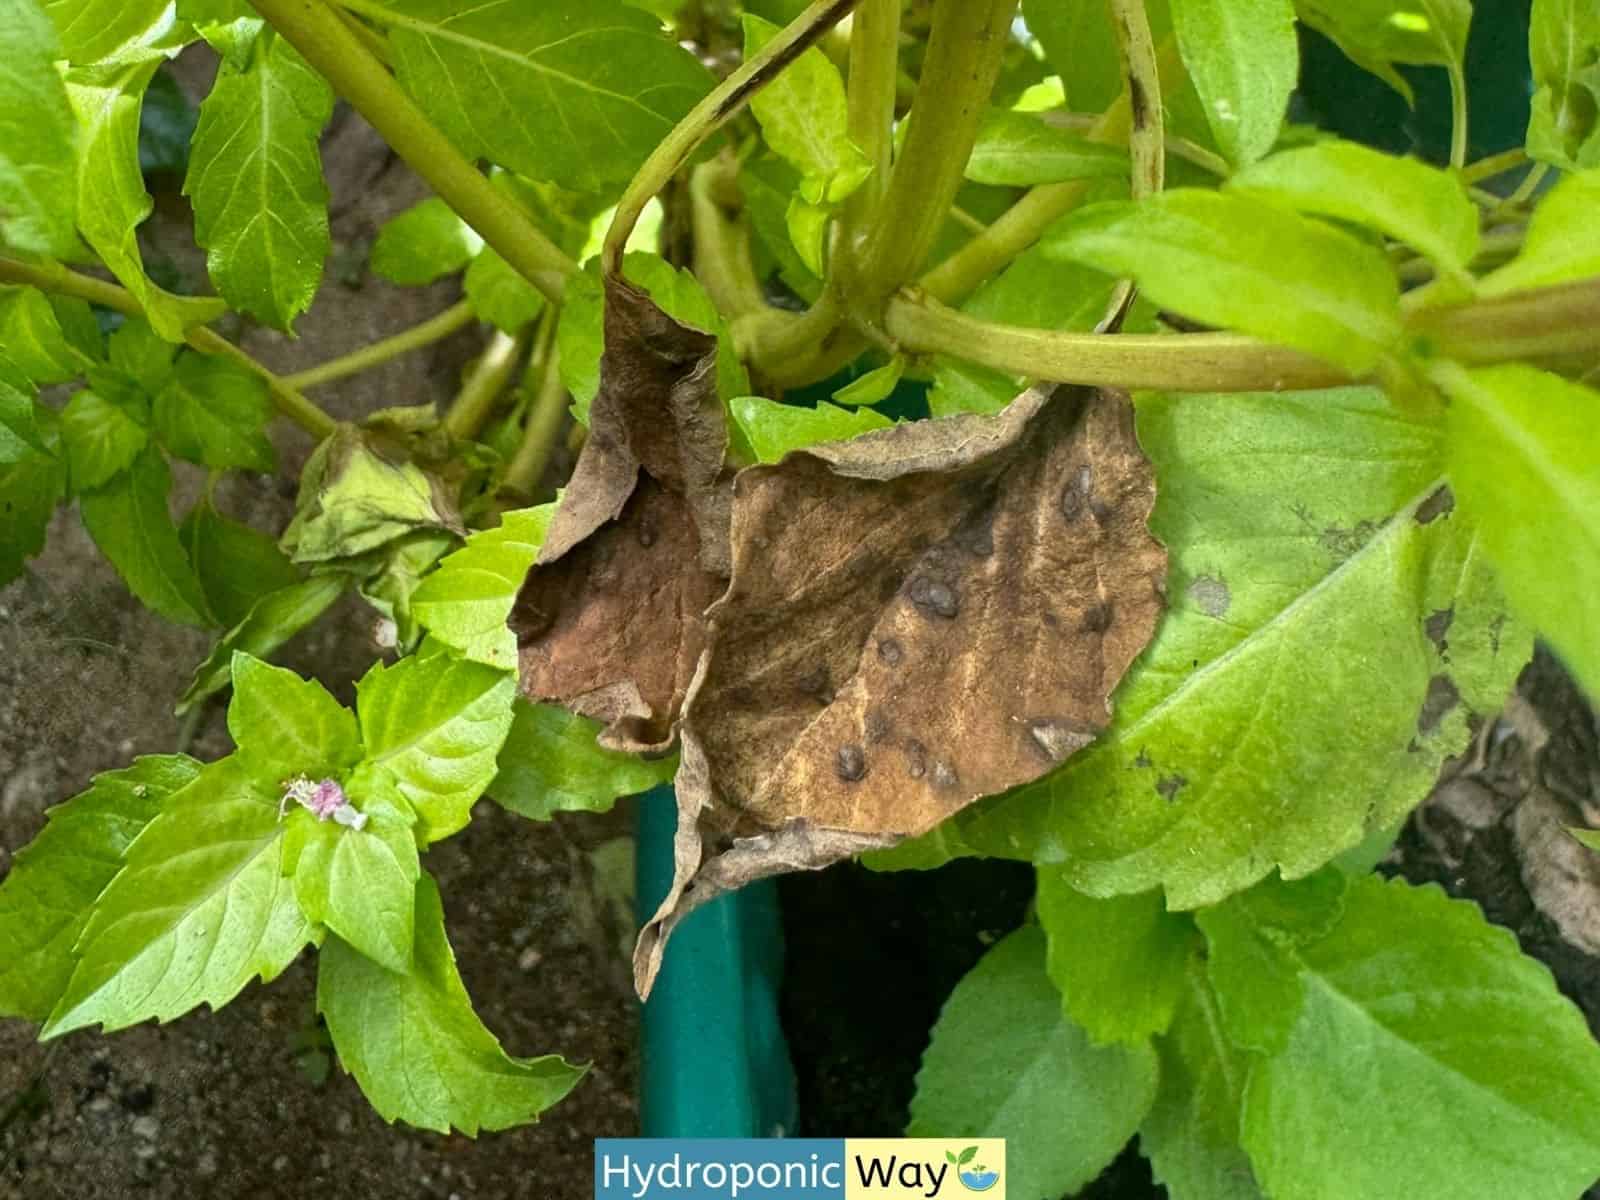 Basil leaves died because of downy mildew